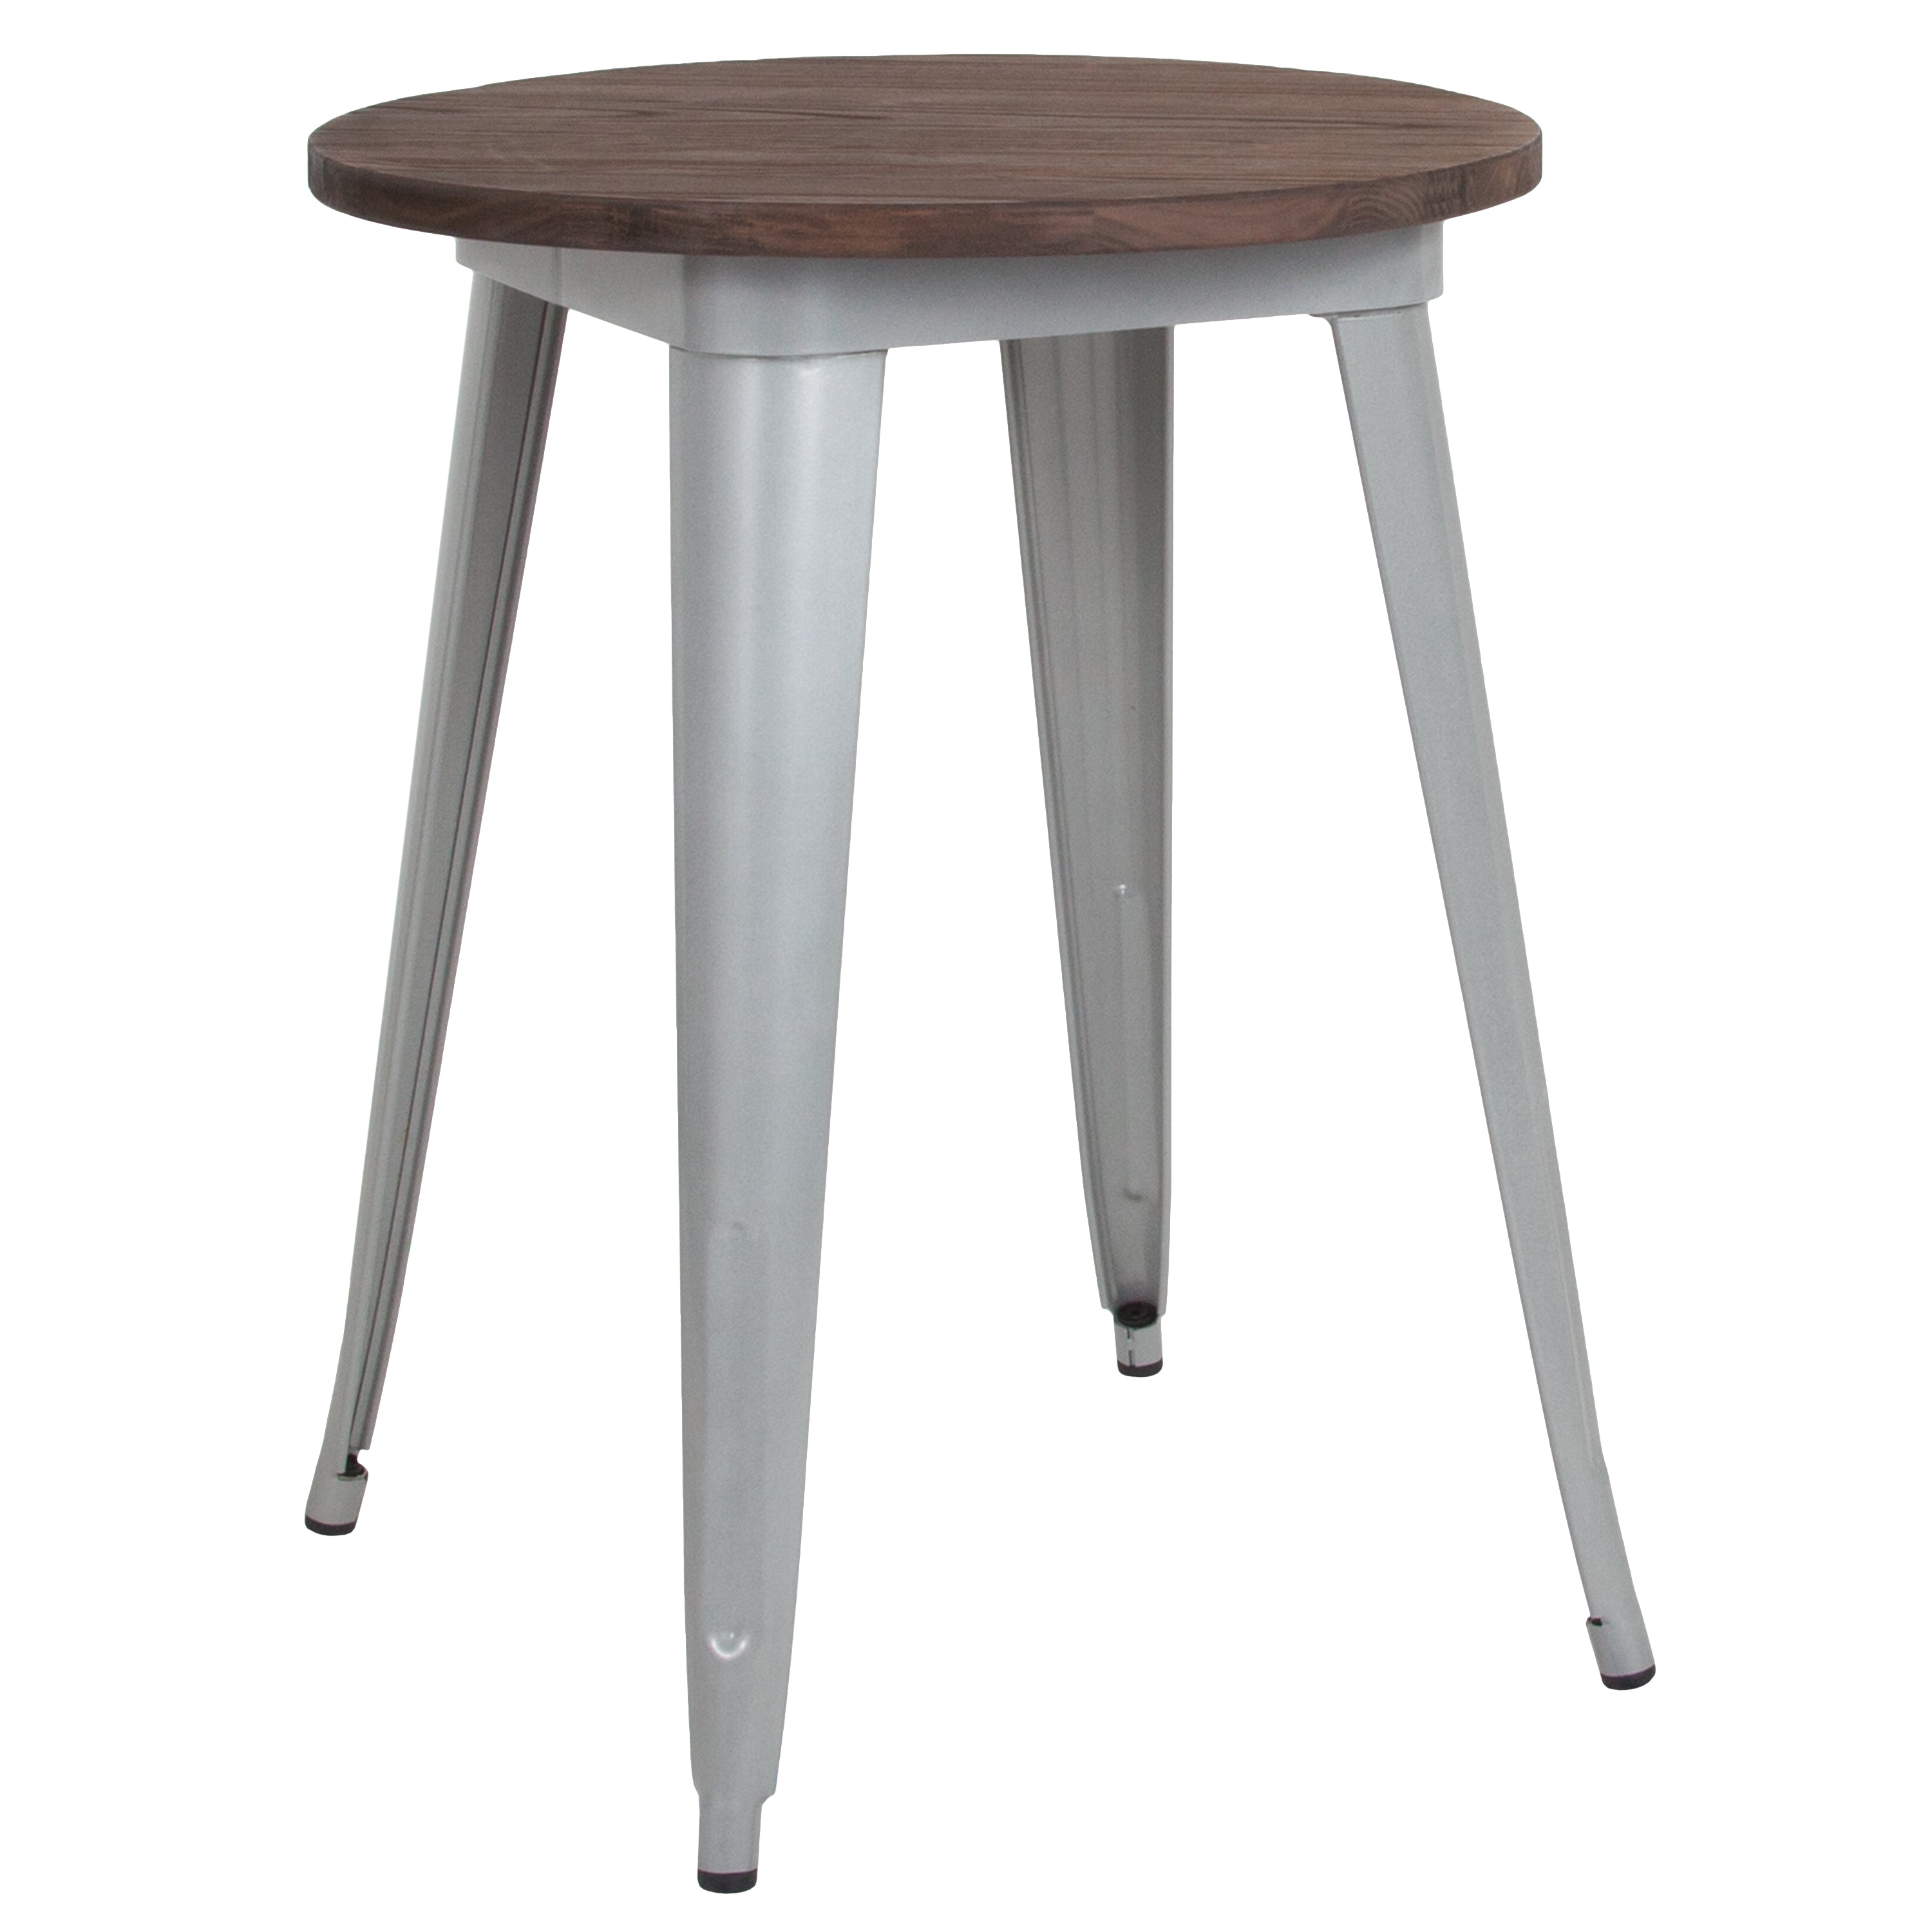 24" Round Metal Indoor Table with Rustic Wood Top-Metal/ Colorful Restaurant Table-Flash Furniture-Wall2Wall Furnishings